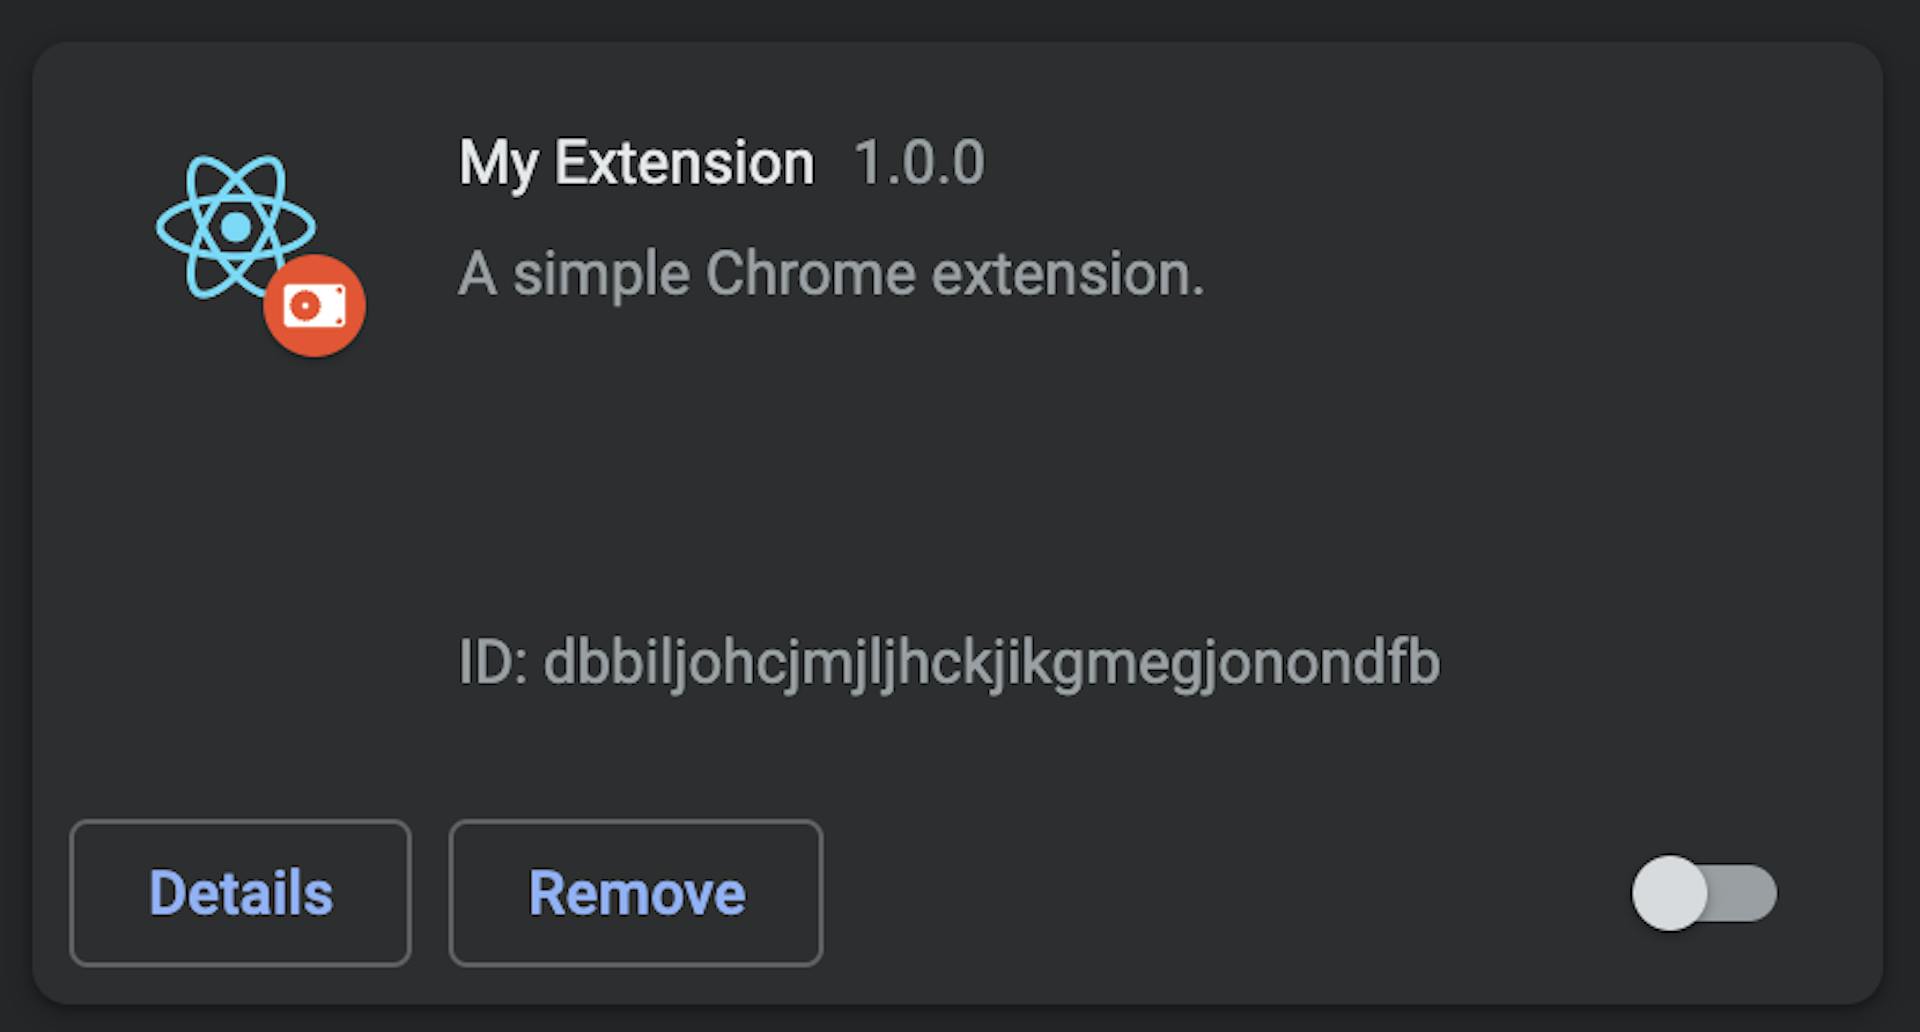 Extension installed